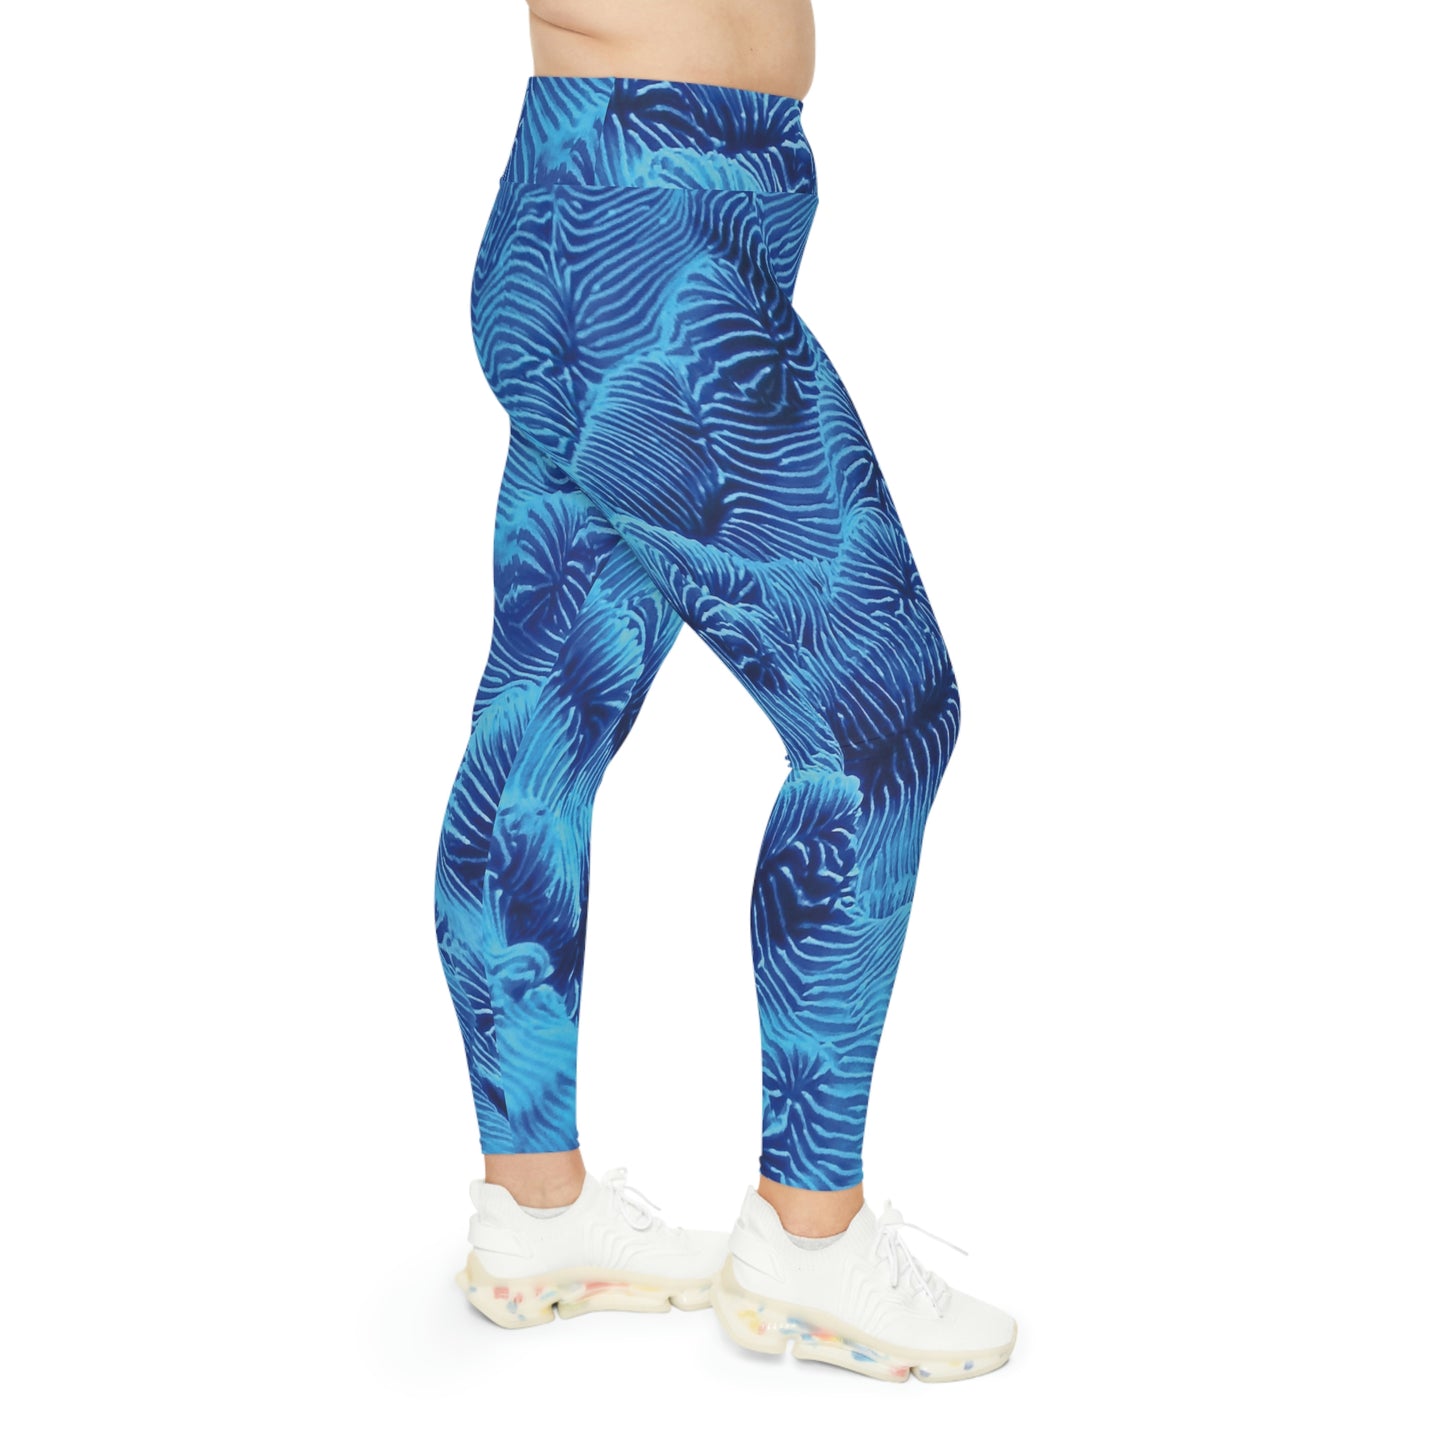 Beach Ocean Plus Size Leggings One of a Kind Gift - Unique Workout Activewear tights for Wife fitness, Mother, Girlfriend Christmas Gift